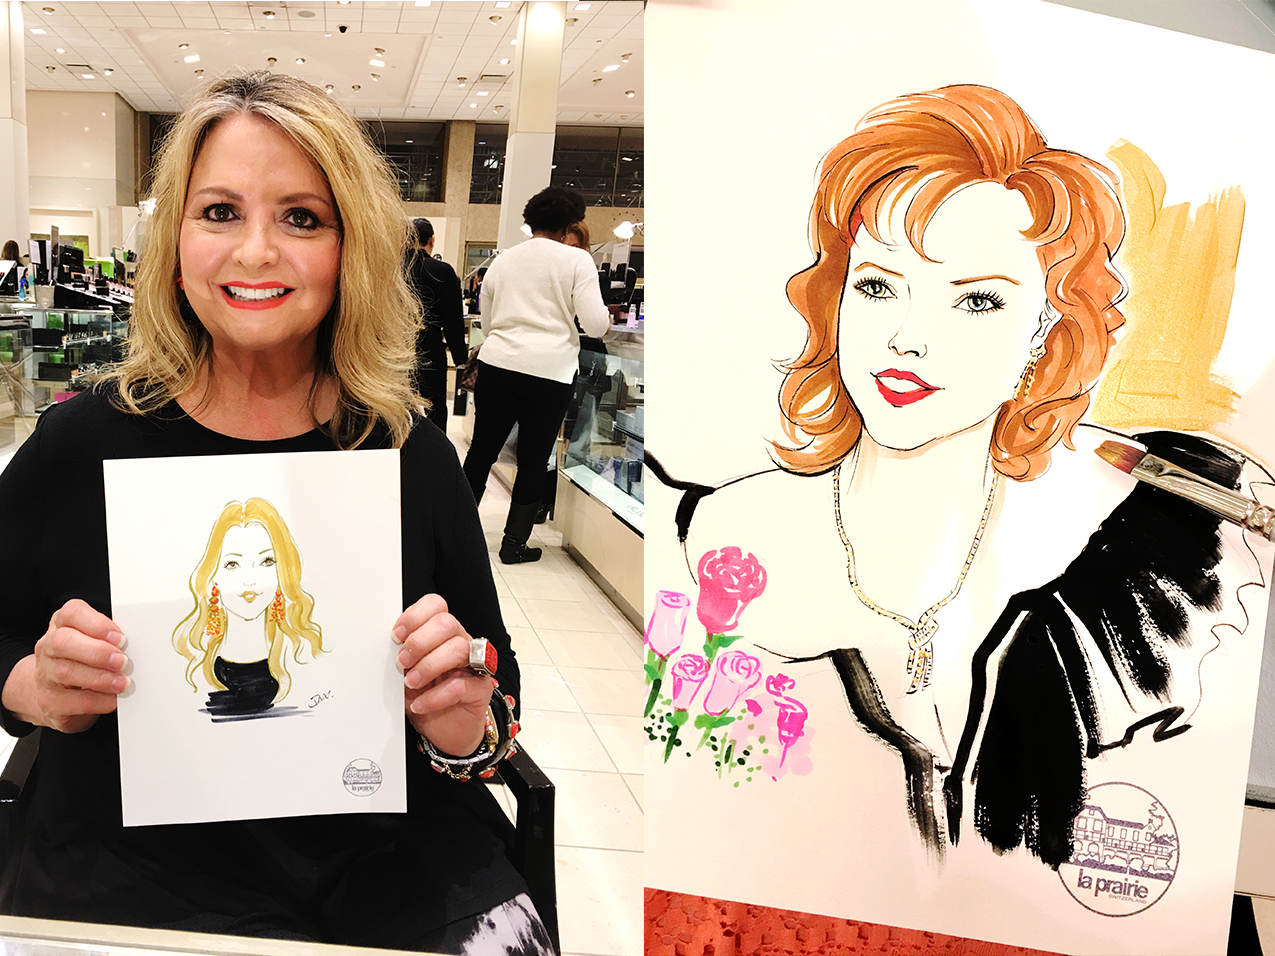 Live-sketch-at-La-Prairie-beauty-event by Rongrong DeVoe.jpg